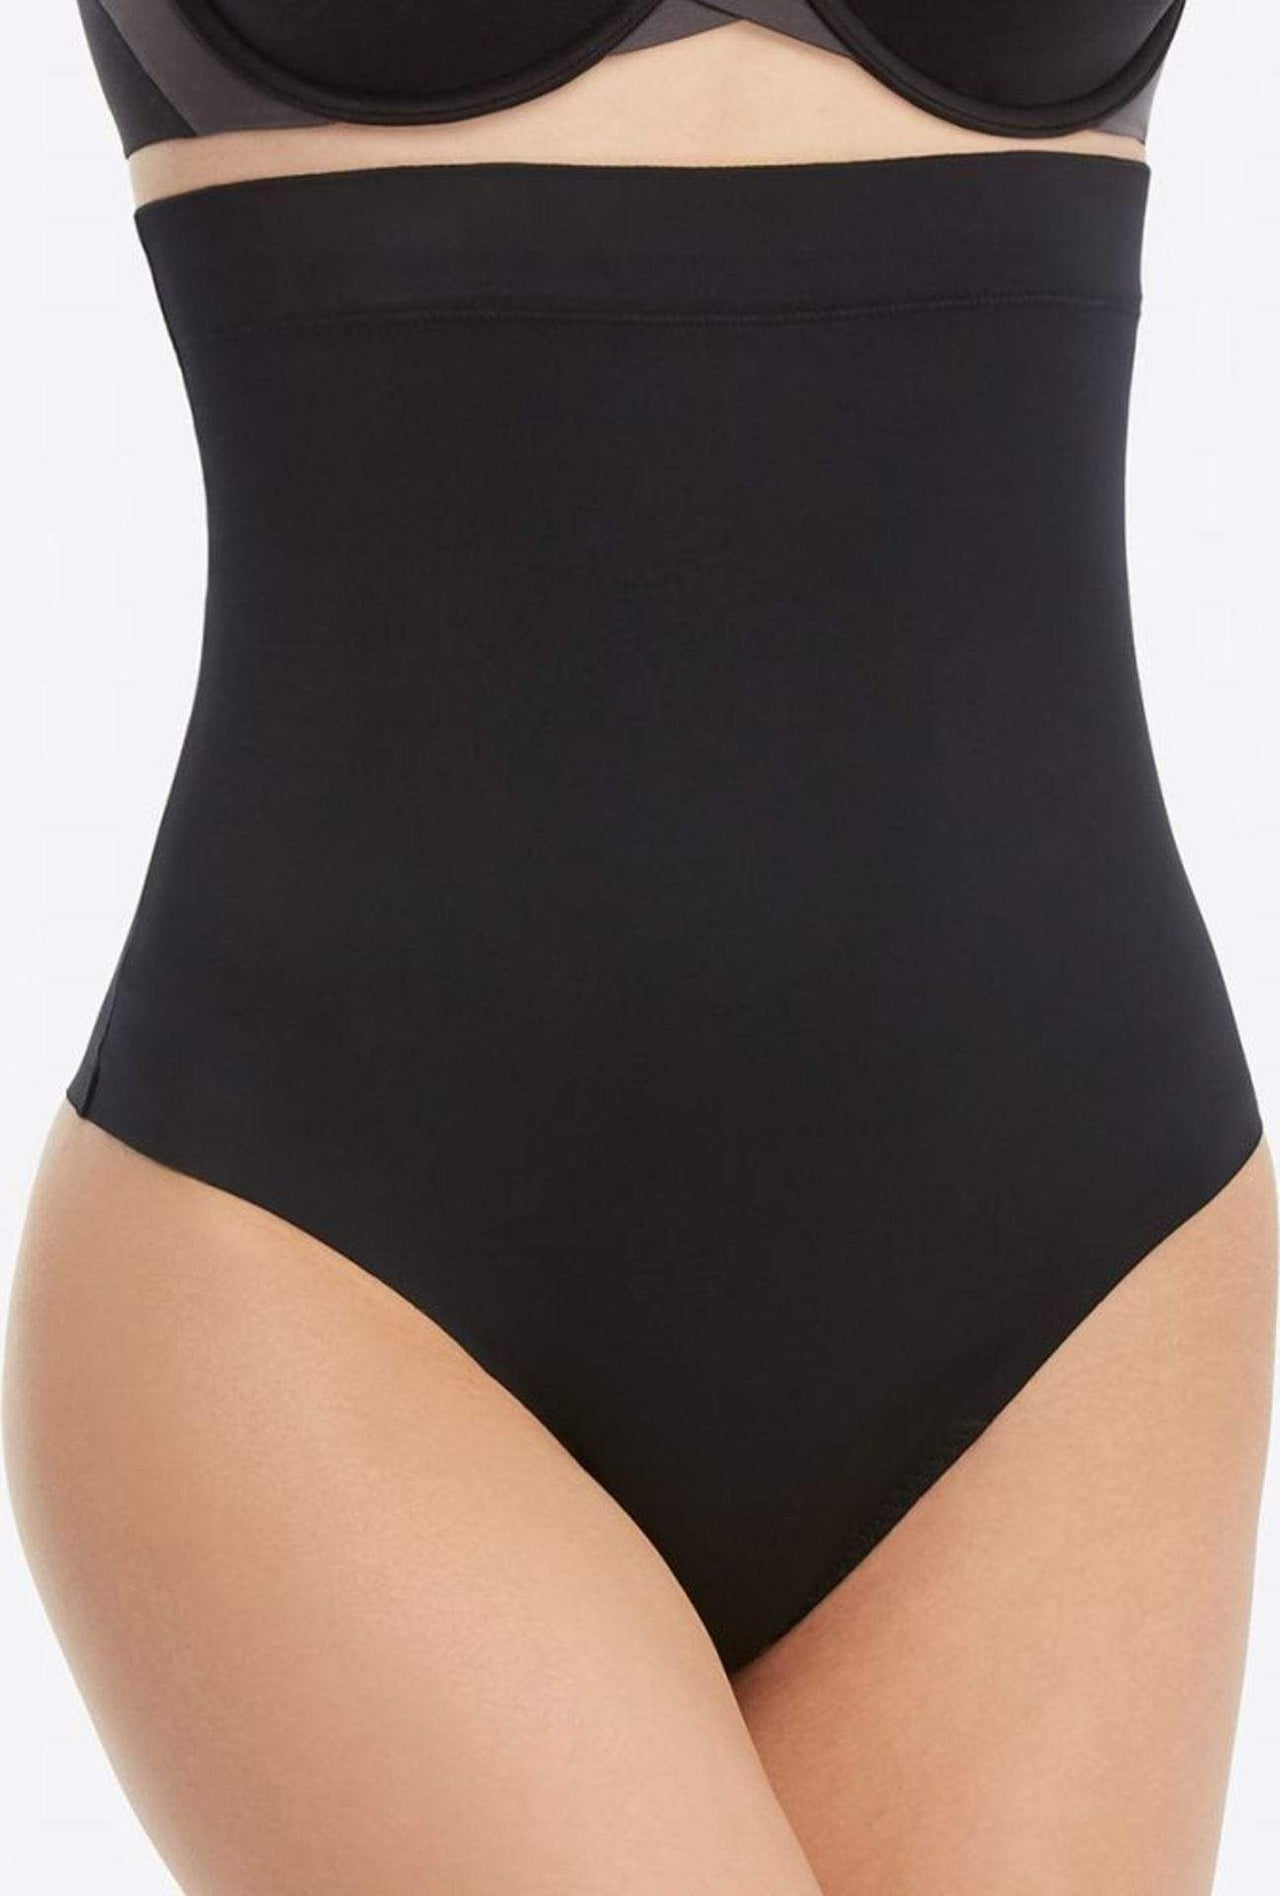 SPANX Suit Your Fancy High Waist Thong in Very Black